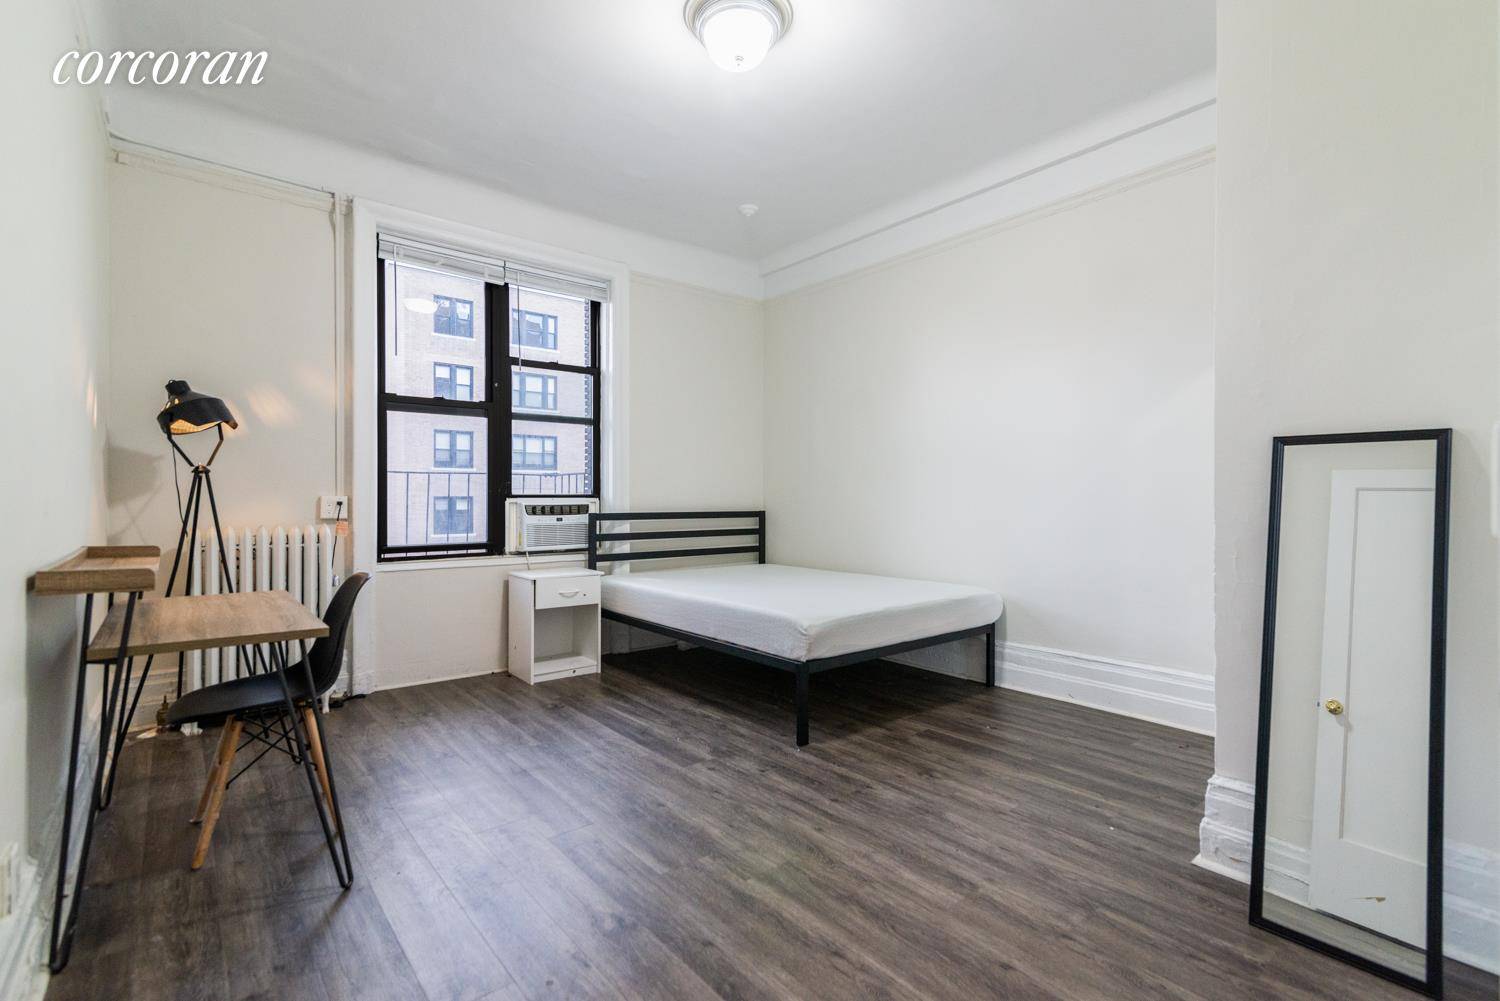 3br 2bath in doorman building at the corner of Broadway amp ; West 110th Street !